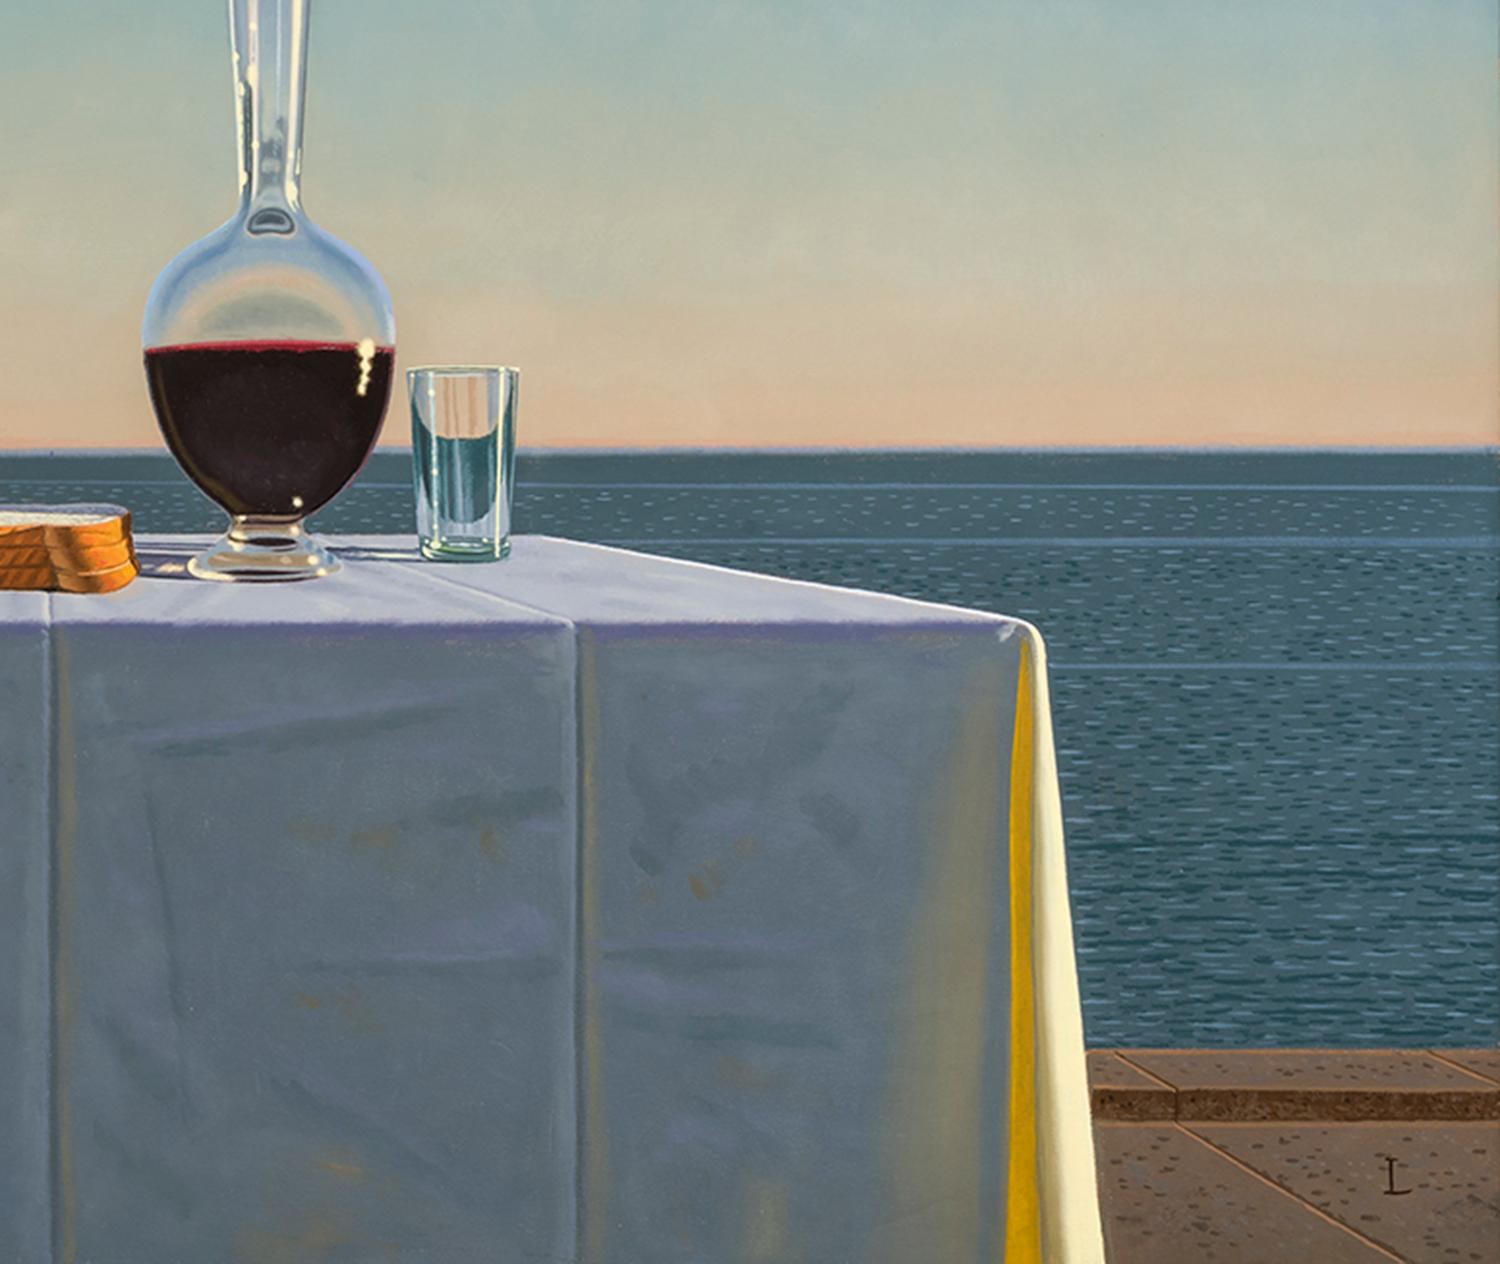 SAPERE AUDE. Dare to be wise. Immanuel Kant’s directive is embodied in the work of David Ligare. For thirty-five years, Ligare has dedicated his work to Classicist ideals: Truth, Beauty, Balance, Form. With full awareness of duplicitous and shifting